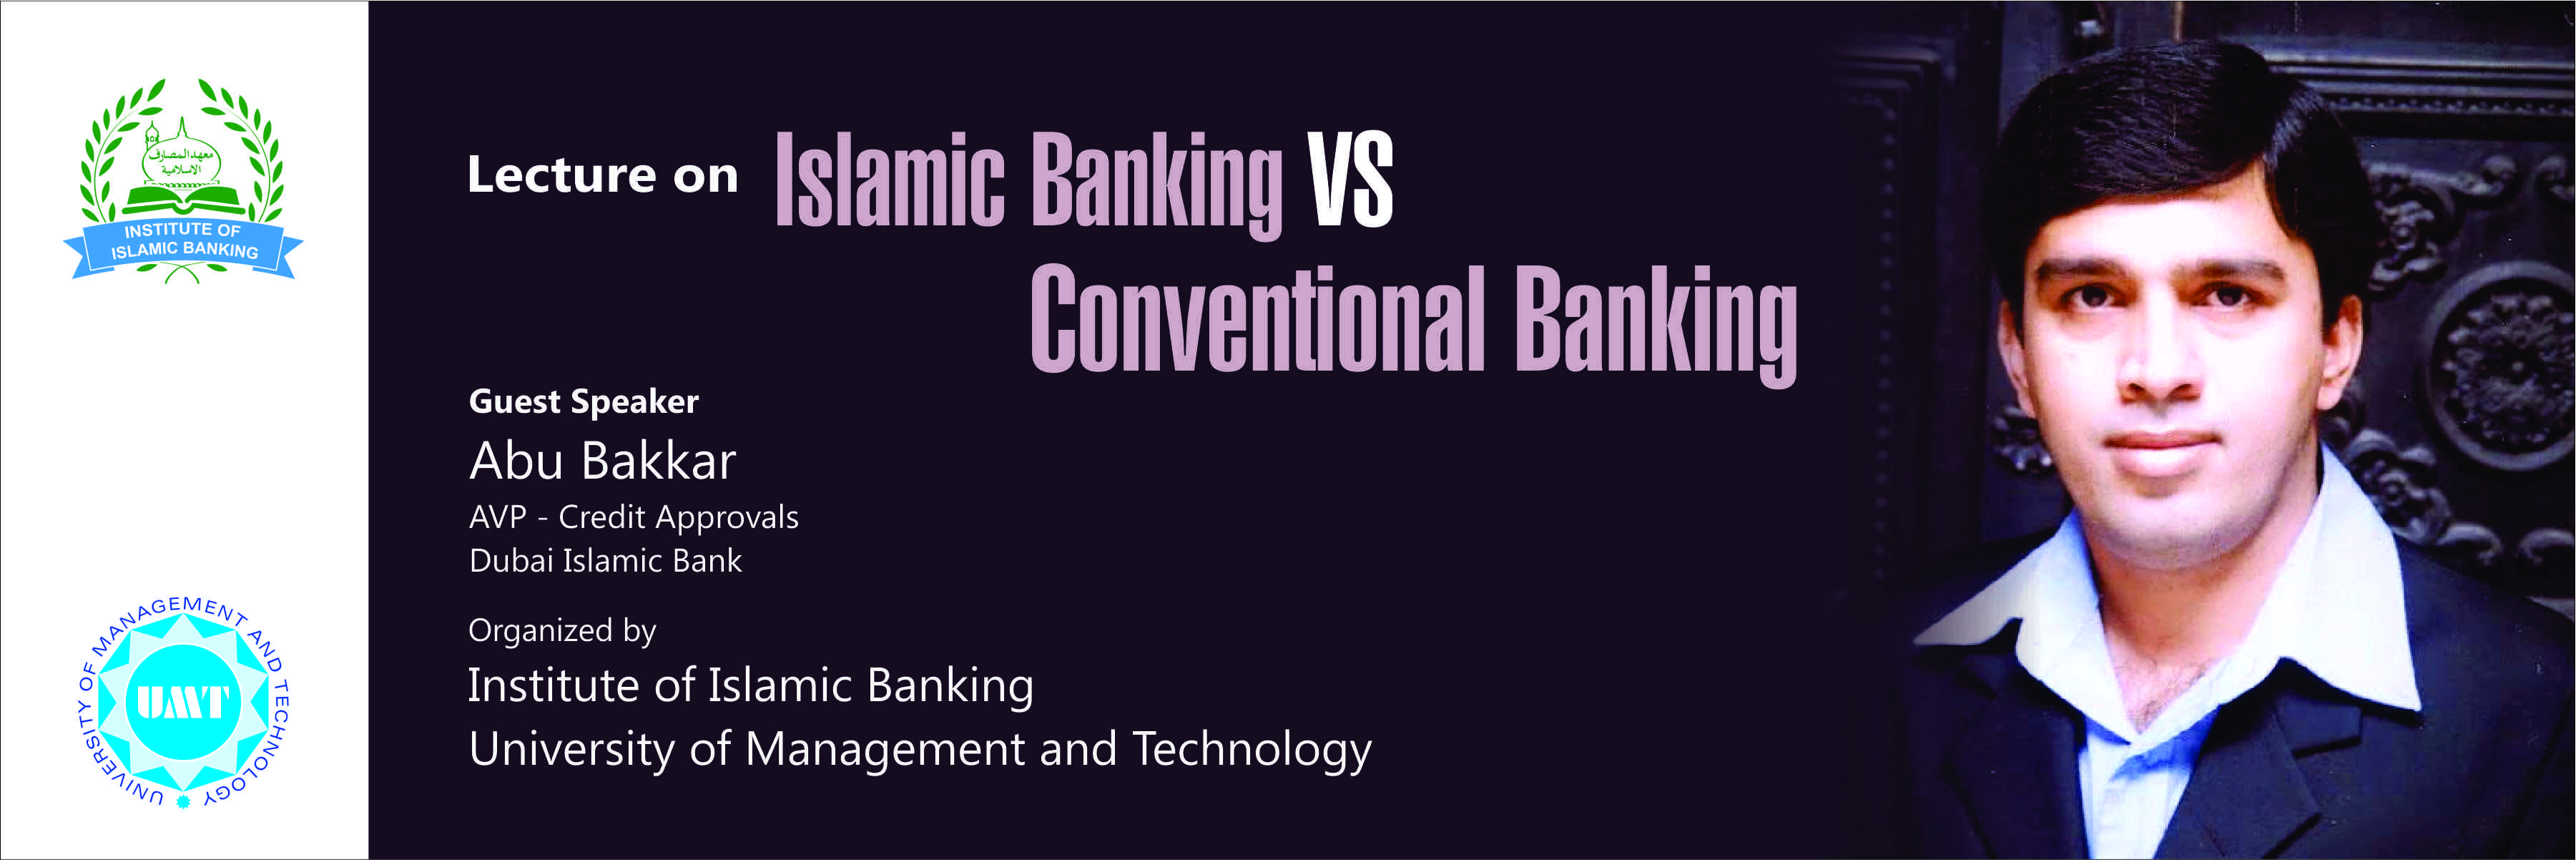 Lecture on Islamic vs. Conventional Banking